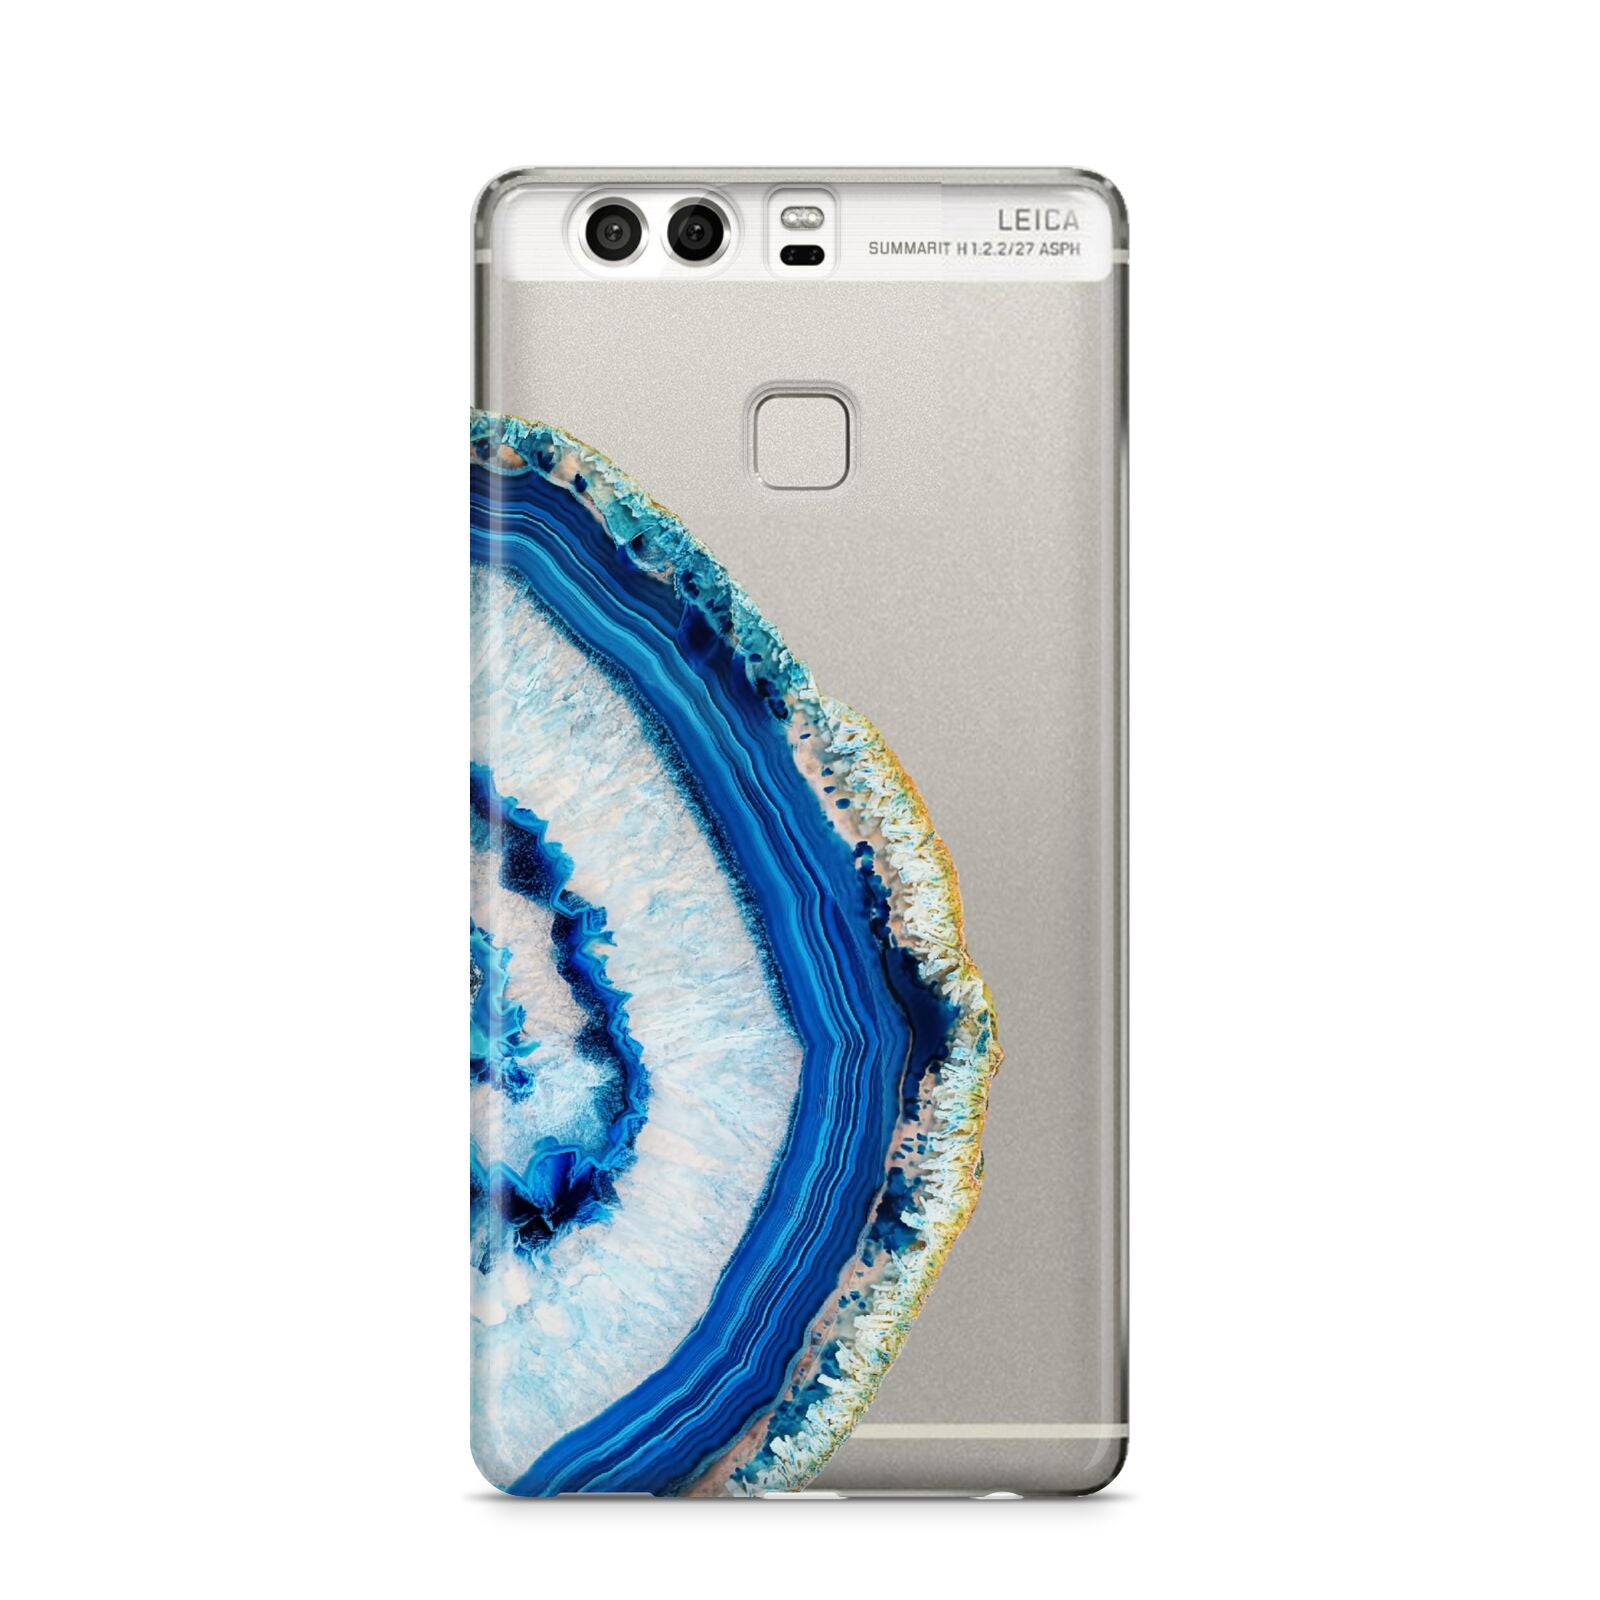 Agate Dark Blue and Turquoise Huawei P9 Case